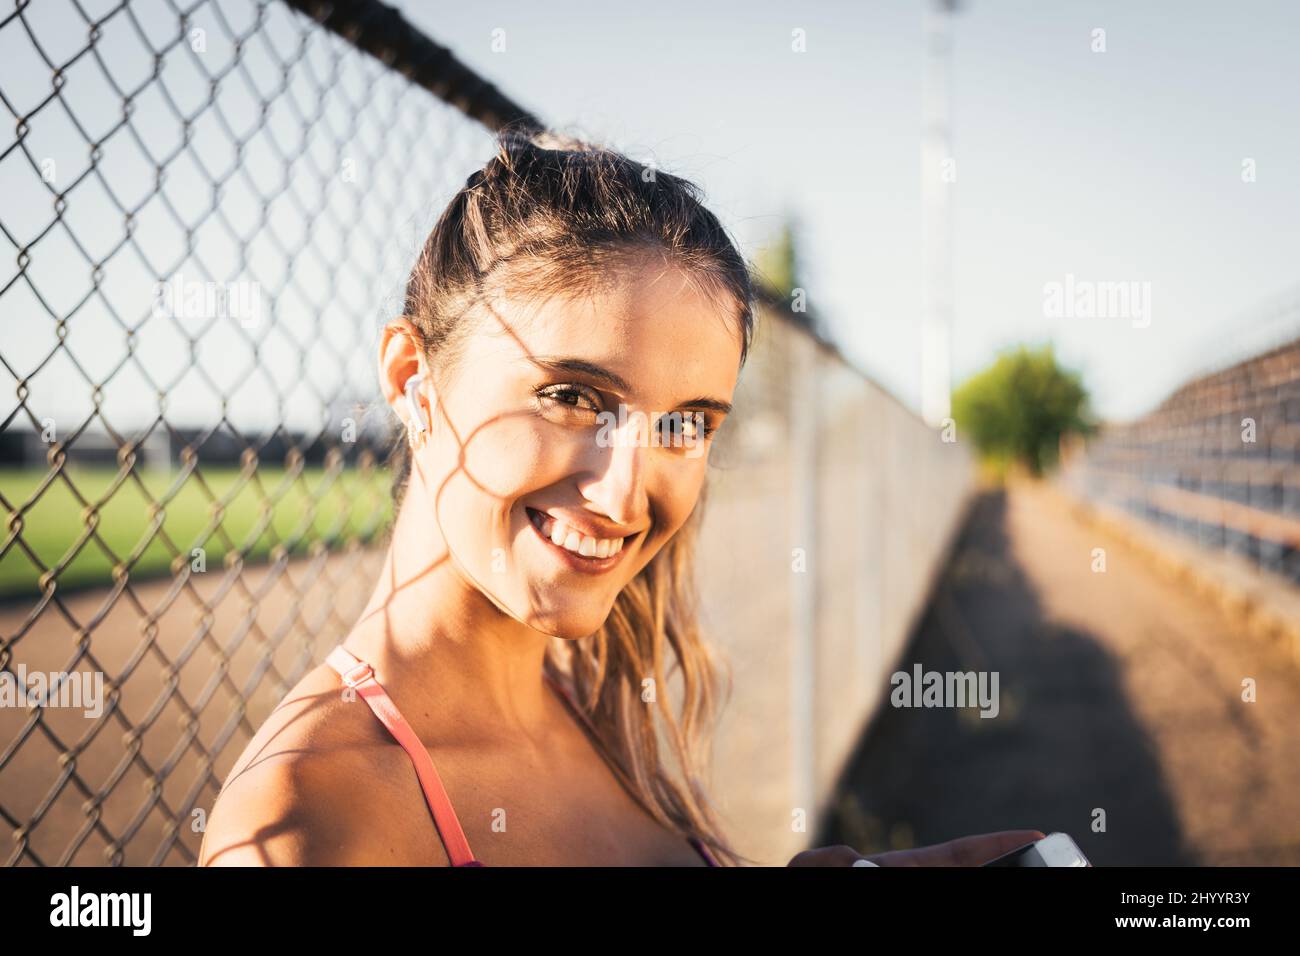 Smiling caucasian young active woman looking at the camera and setting a music playlist on her smartphone  Stock Photo